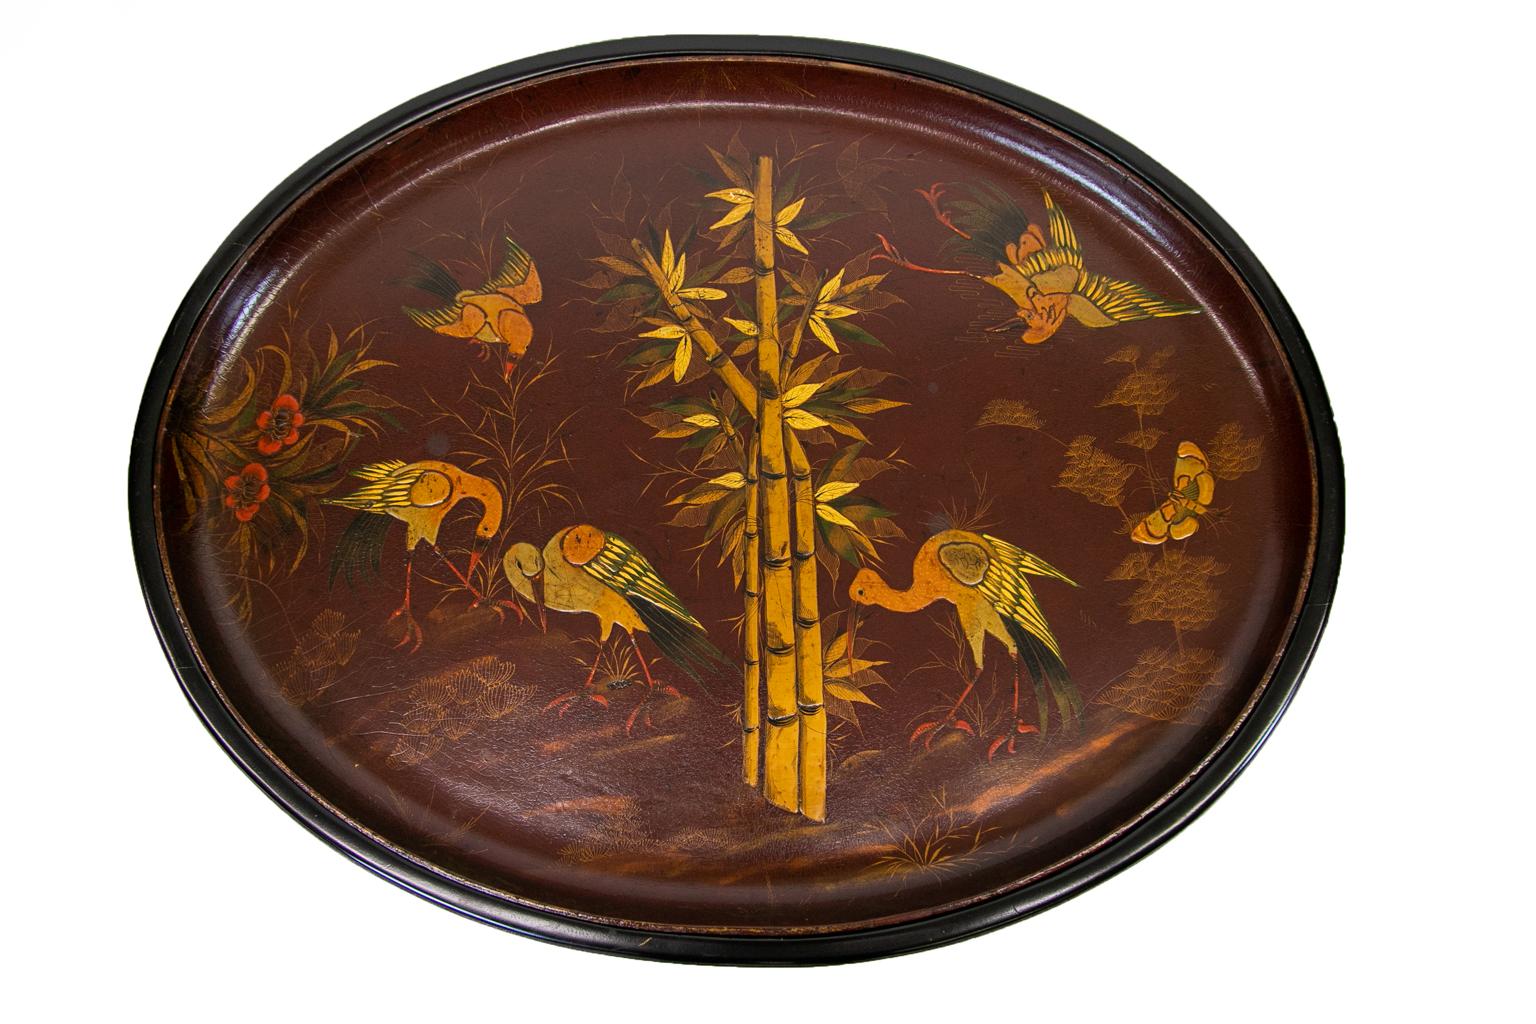 Paper mâché lacquer tray table has bamboo and bird motifs. The stand was recently custom built to fit the tray.
   